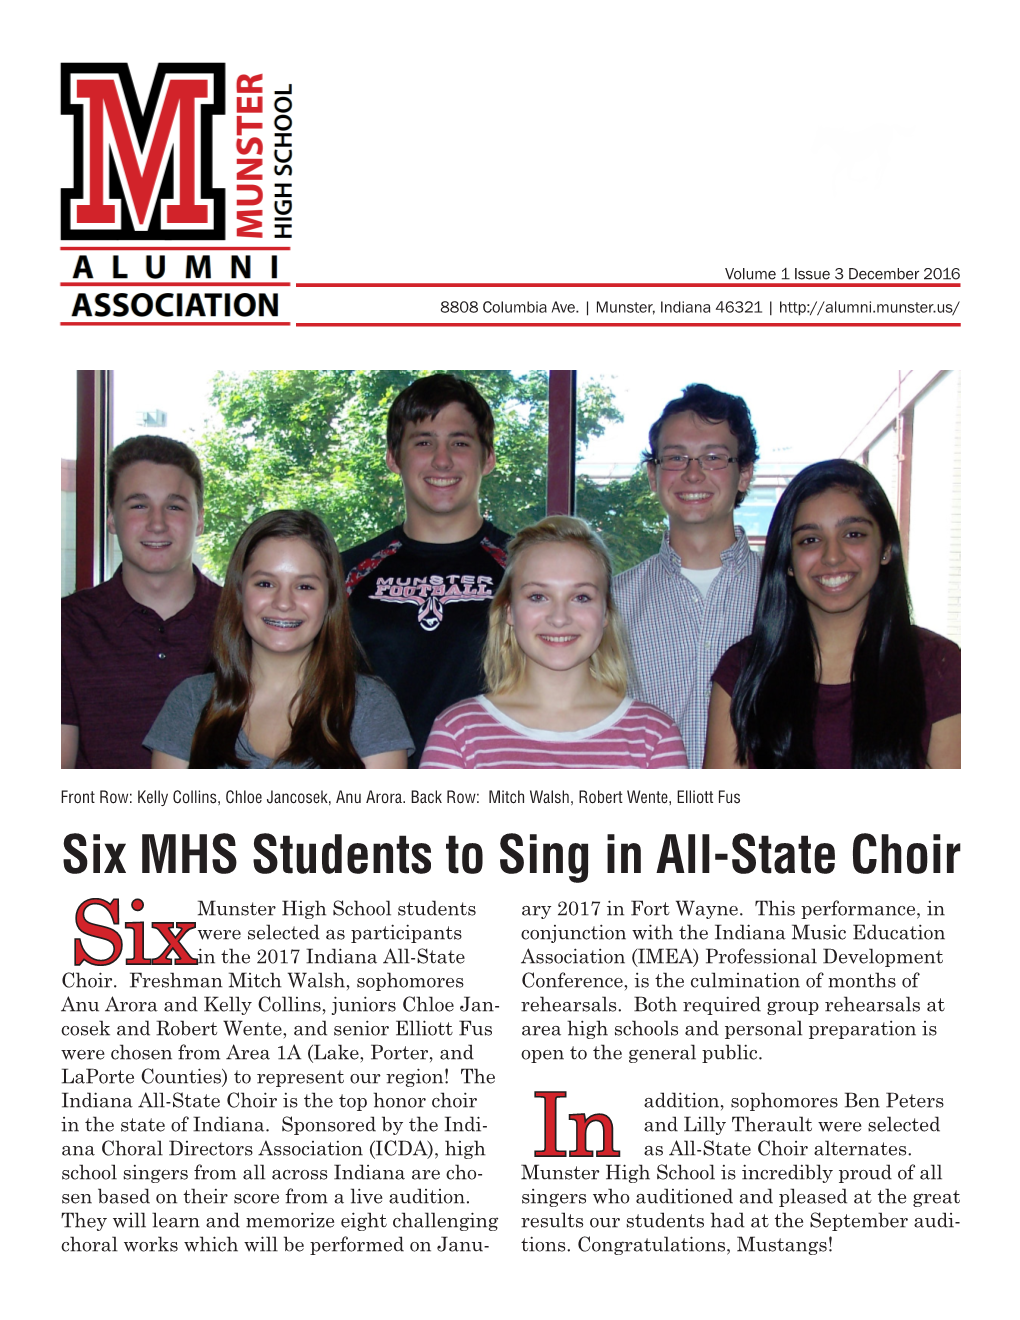 Six MHS Students to Sing in All-State Choir Munster High School Students Ary 2017 in Fort Wayne